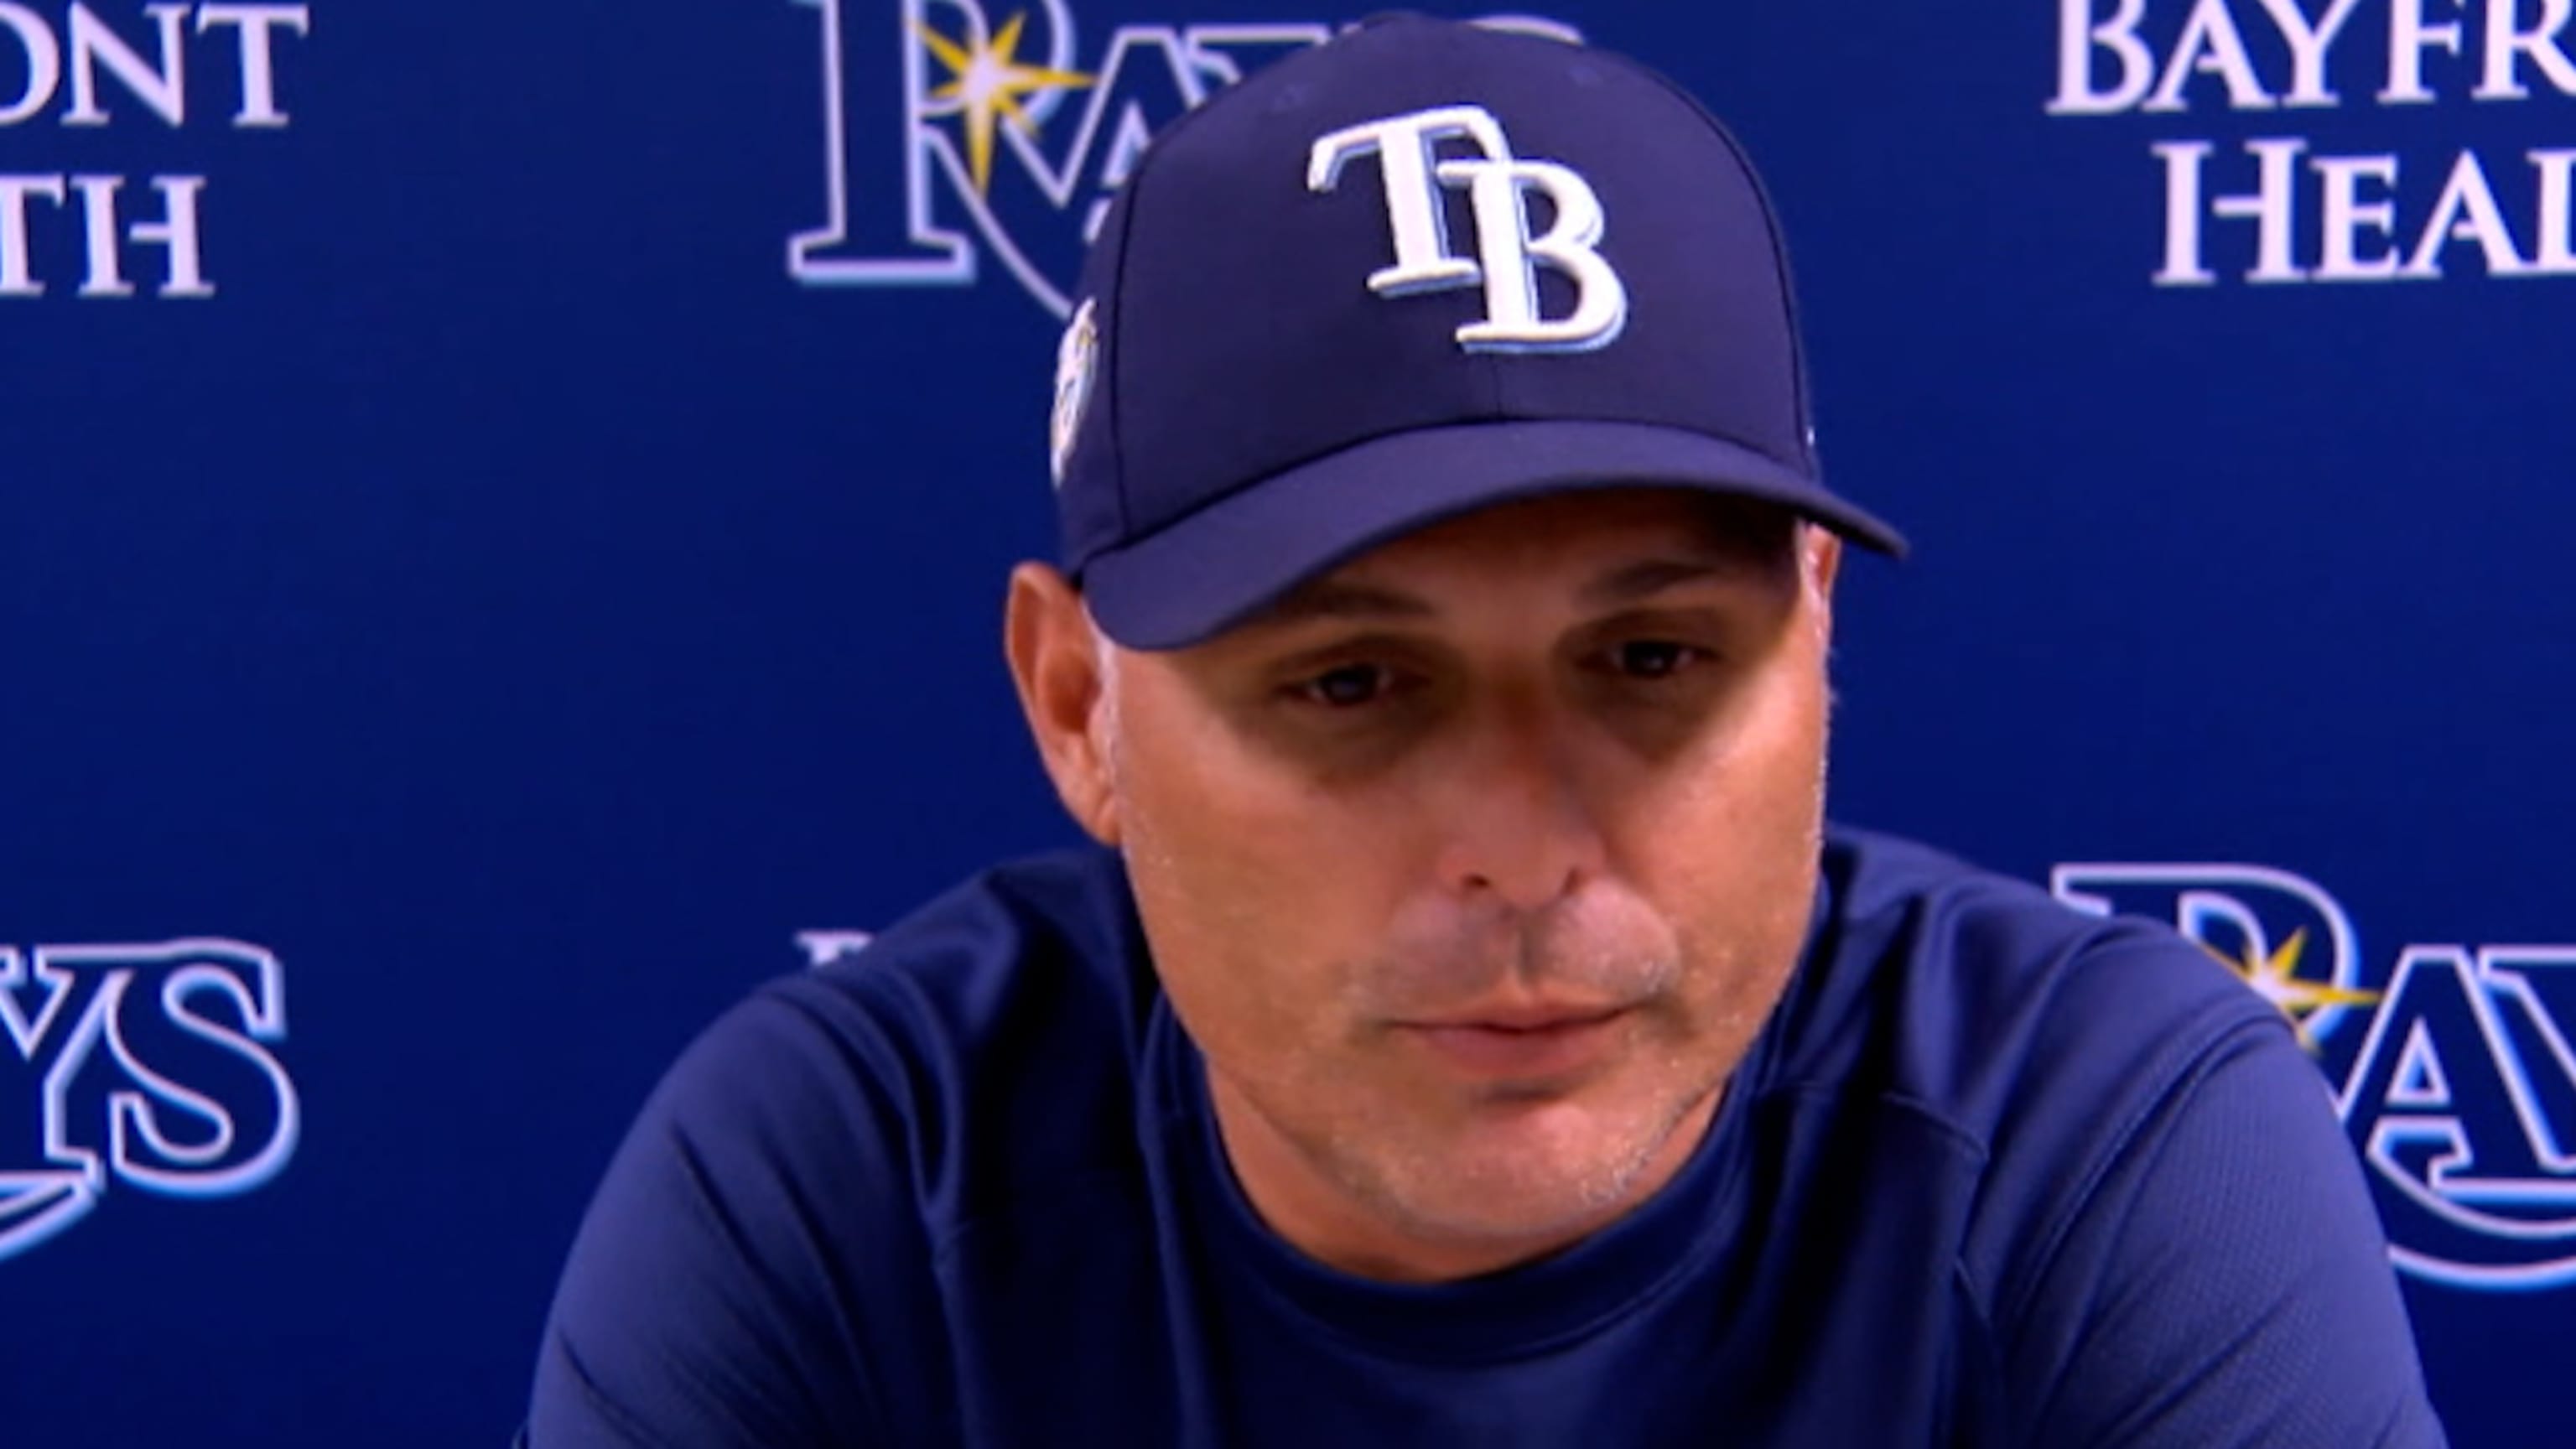 MLB News: Rays outfielder Randy Arozarena thrives on Yankees fans booing  him